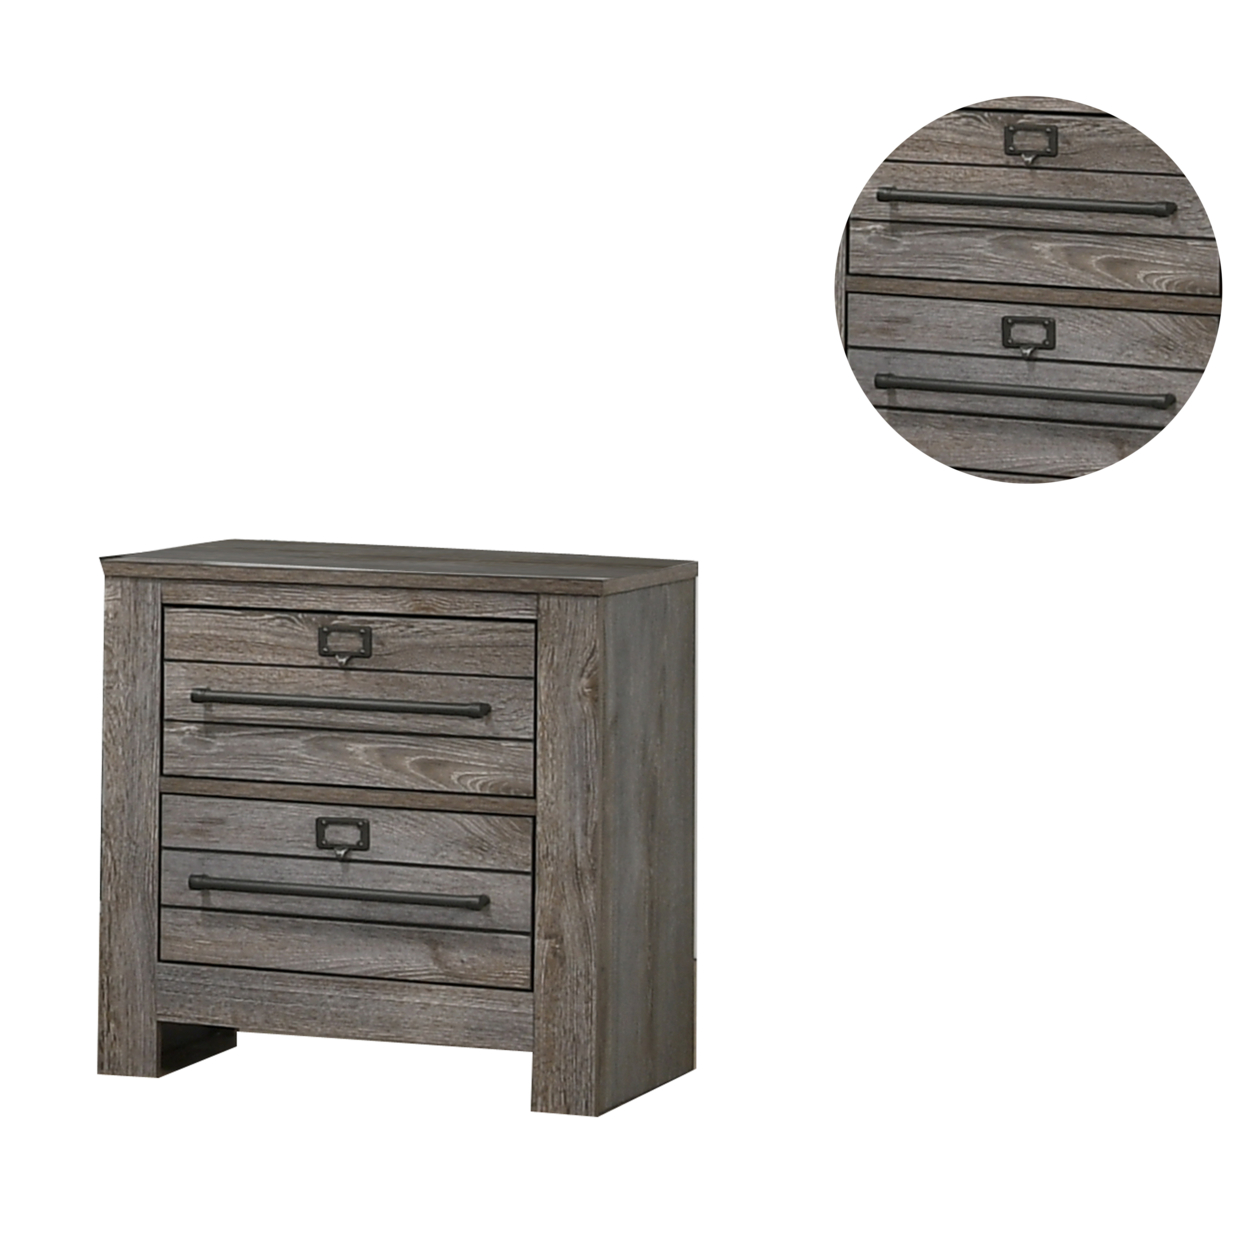 2 Drawer Wooden Nightstand With Metal Bar Pulls And Sled Base, Gray- Saltoro Sherpi